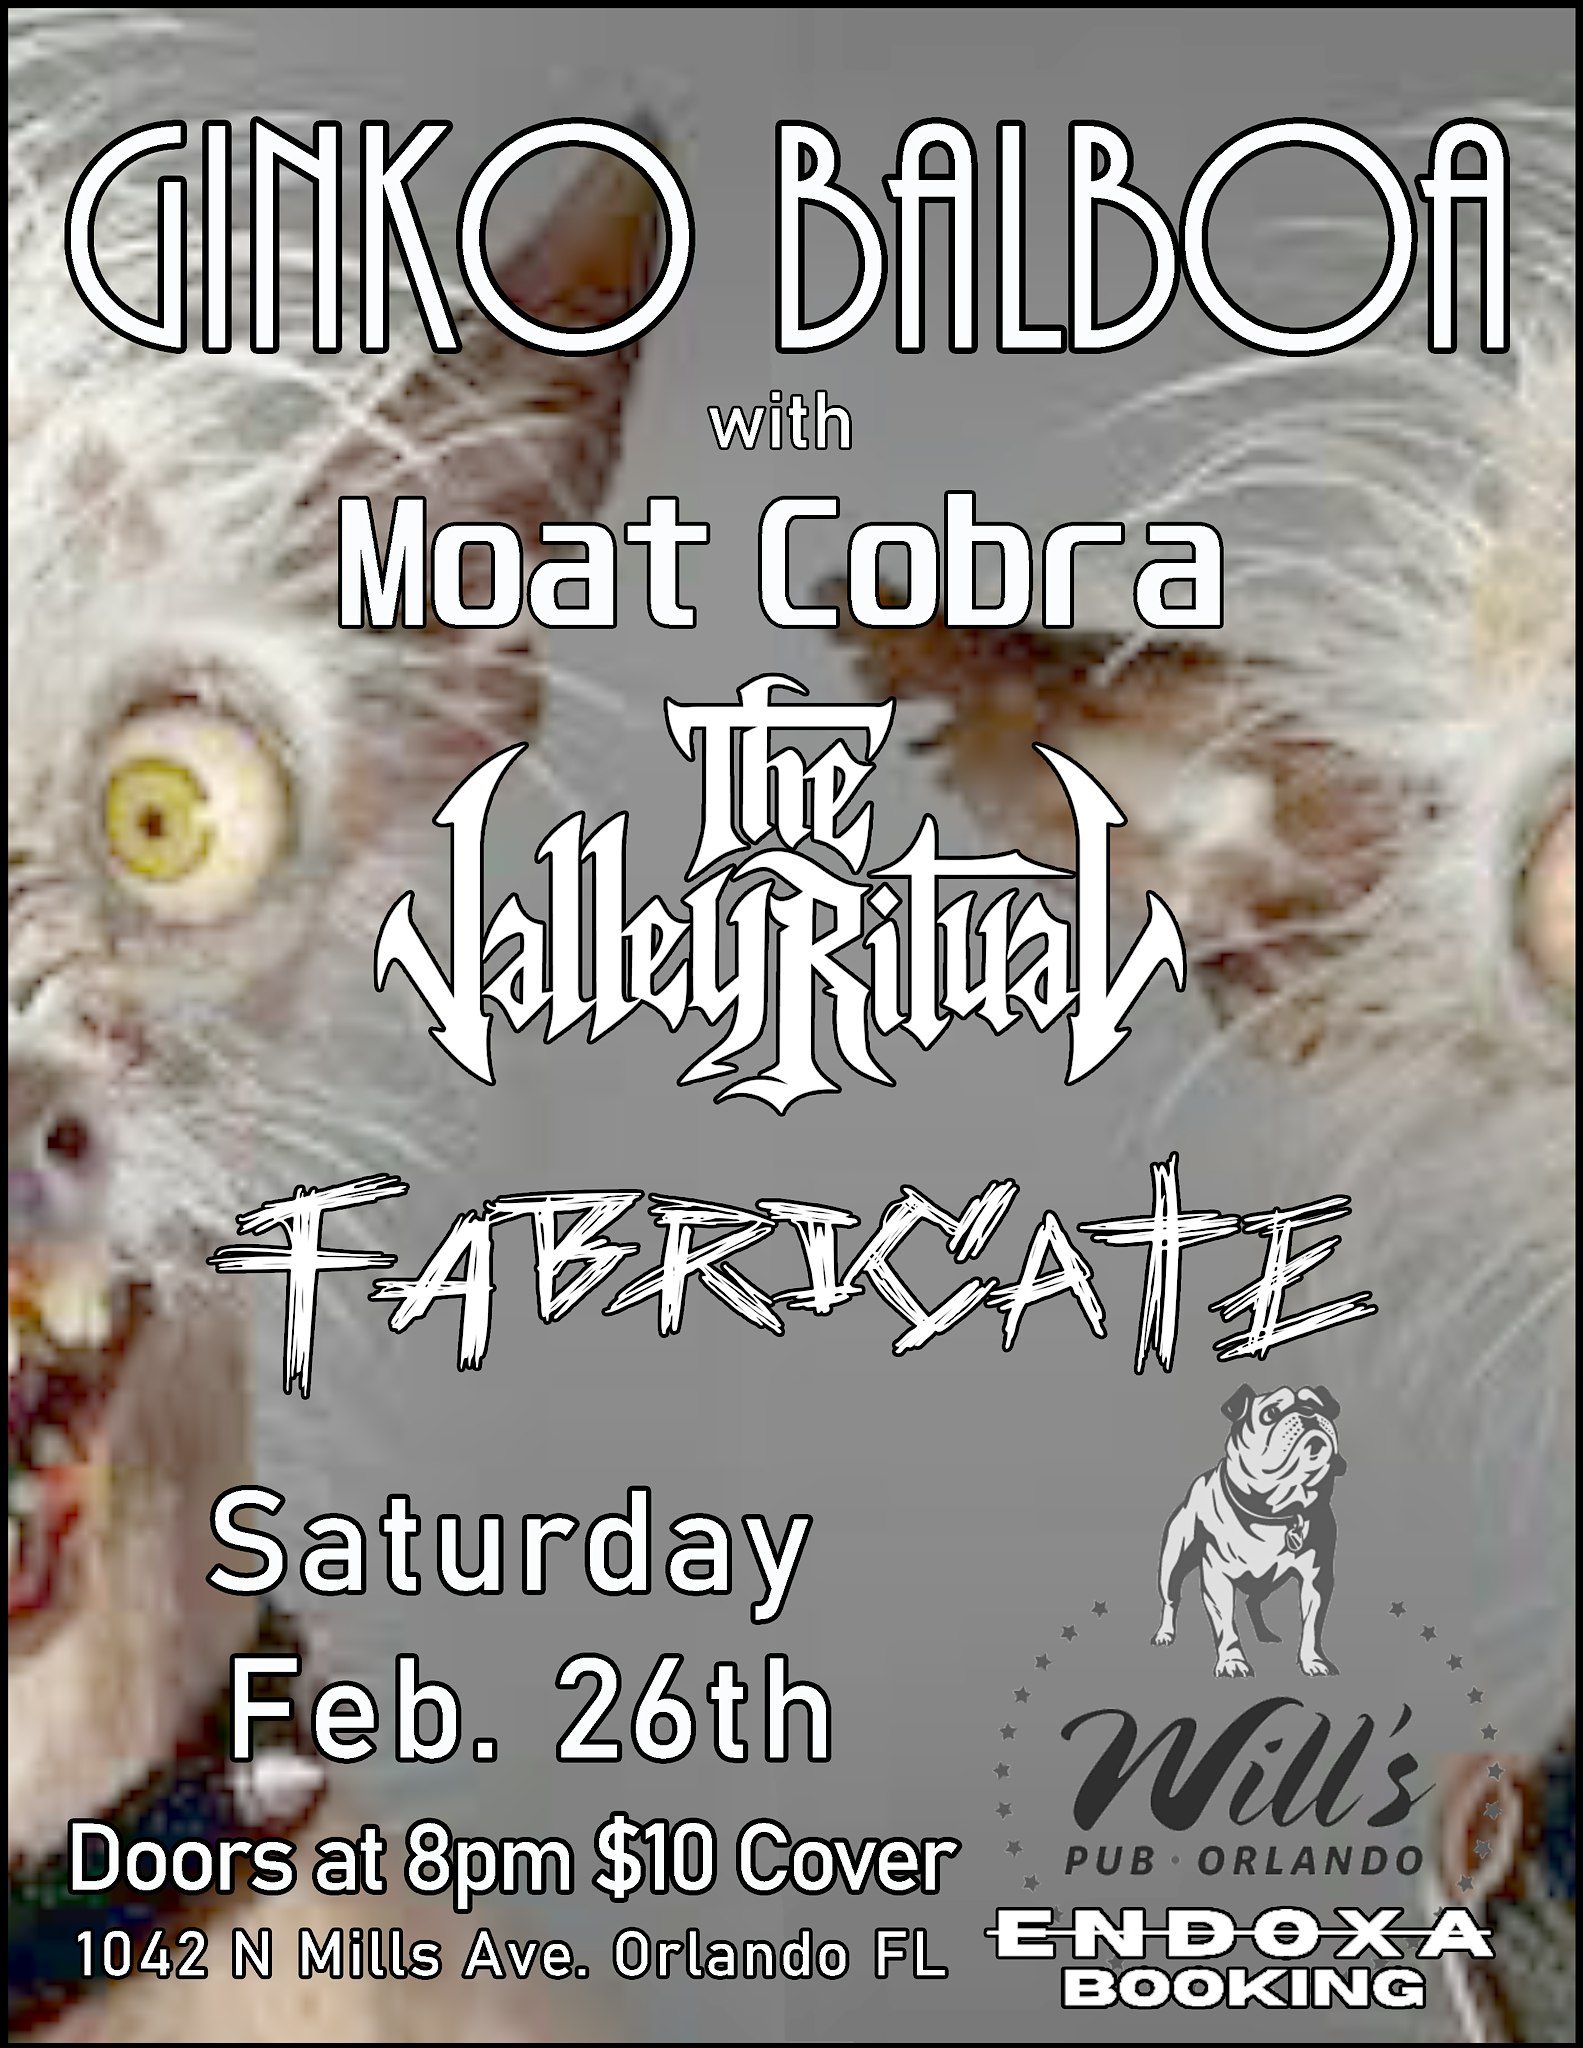 Ginko Balboa, Moat Cobra, The Valley Ritual, and Fabricate in Orlando at Will's Pub